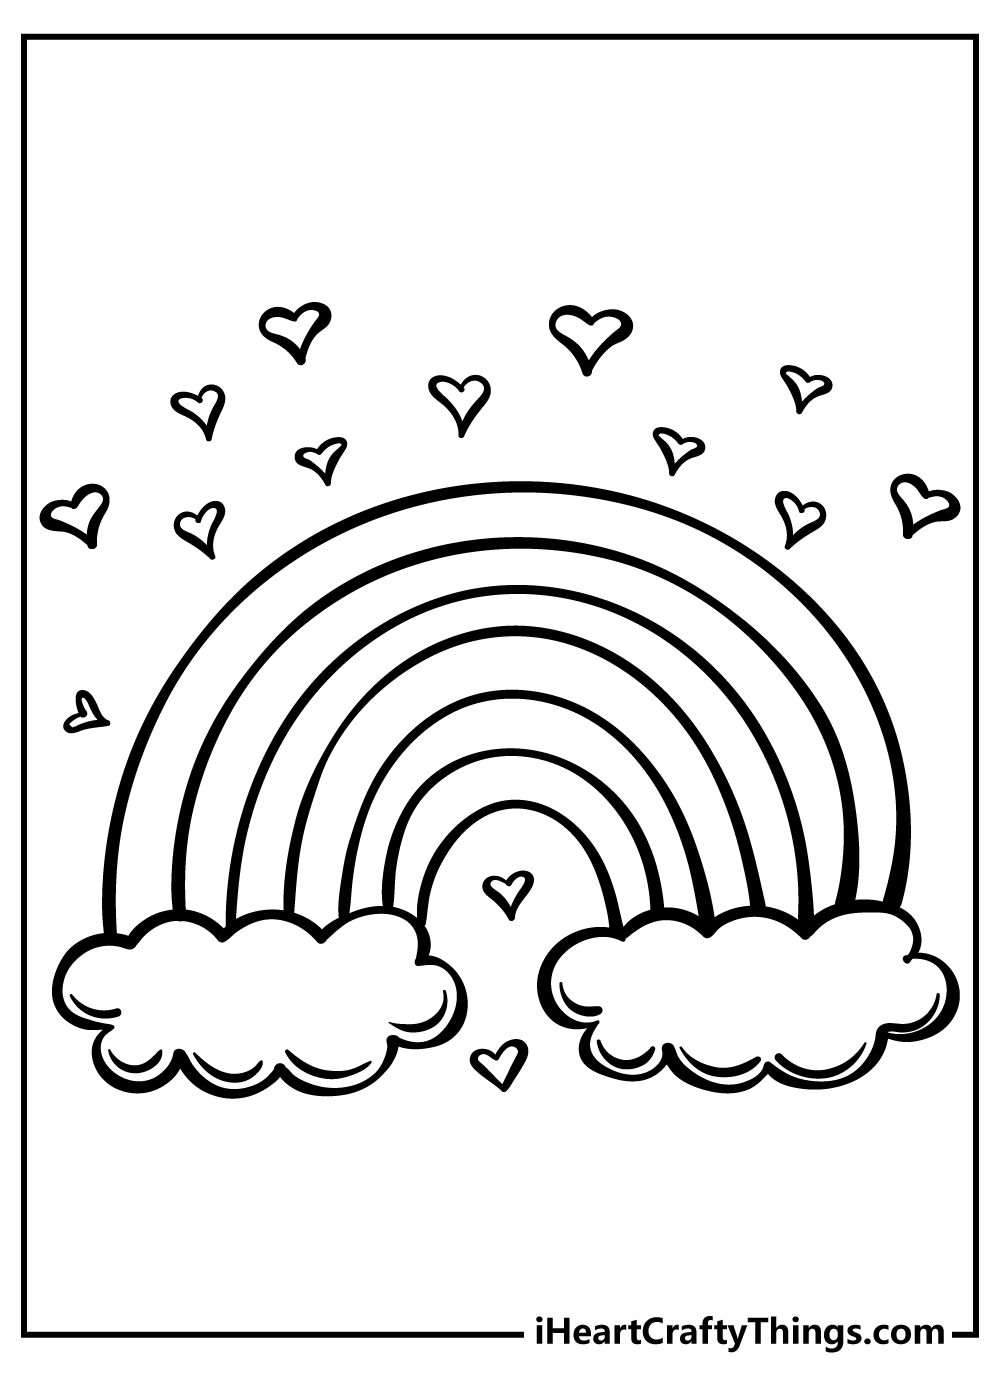 Rainbow coloring pages free printable